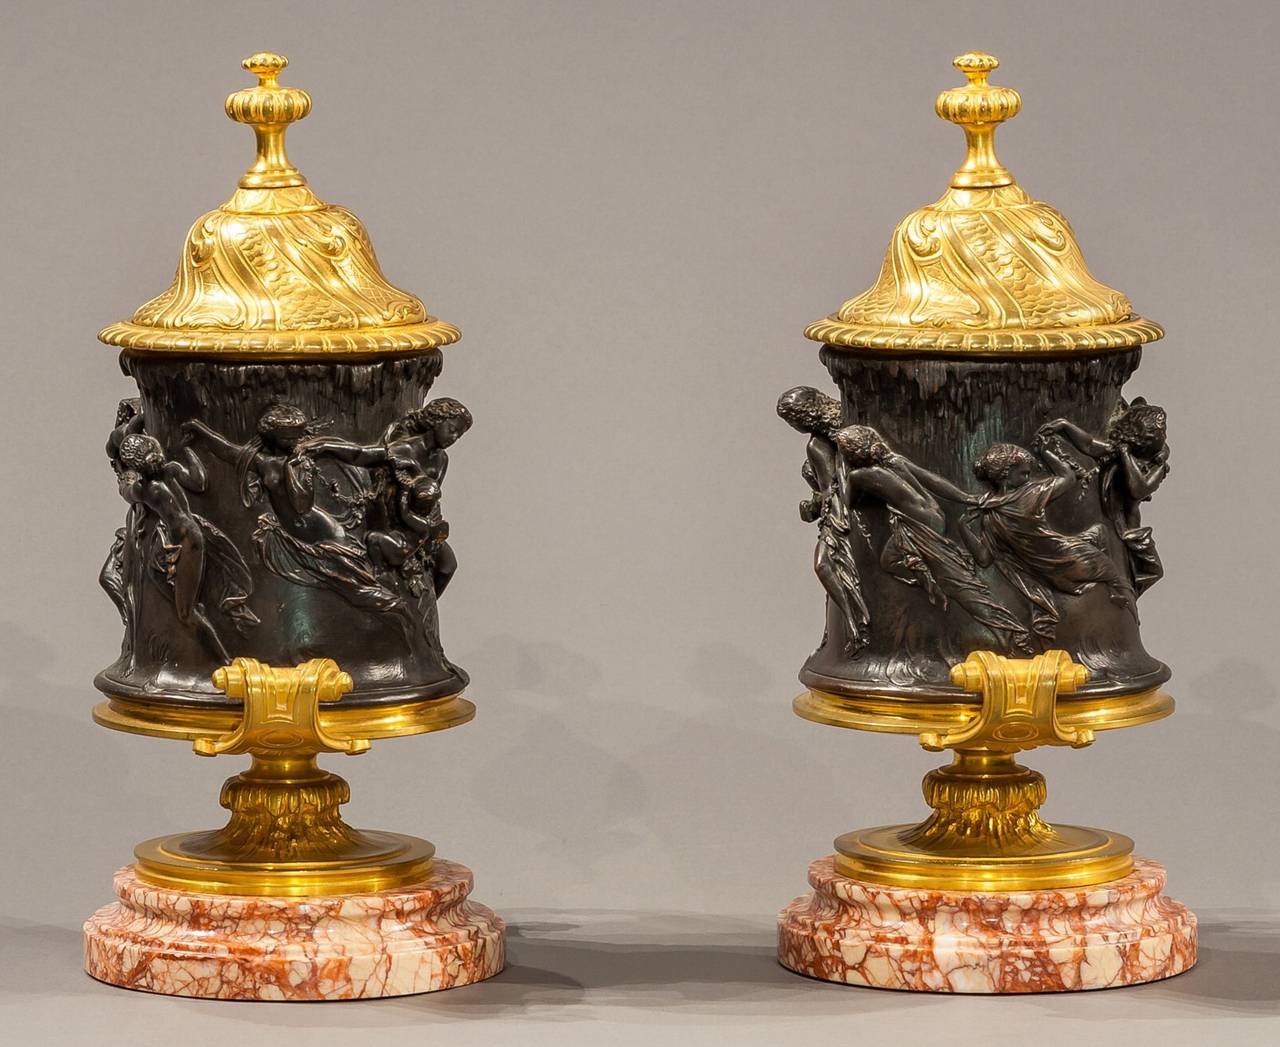 19th Century Signed Pair of Patinated and Gilt Bronze Figural Covered Urns